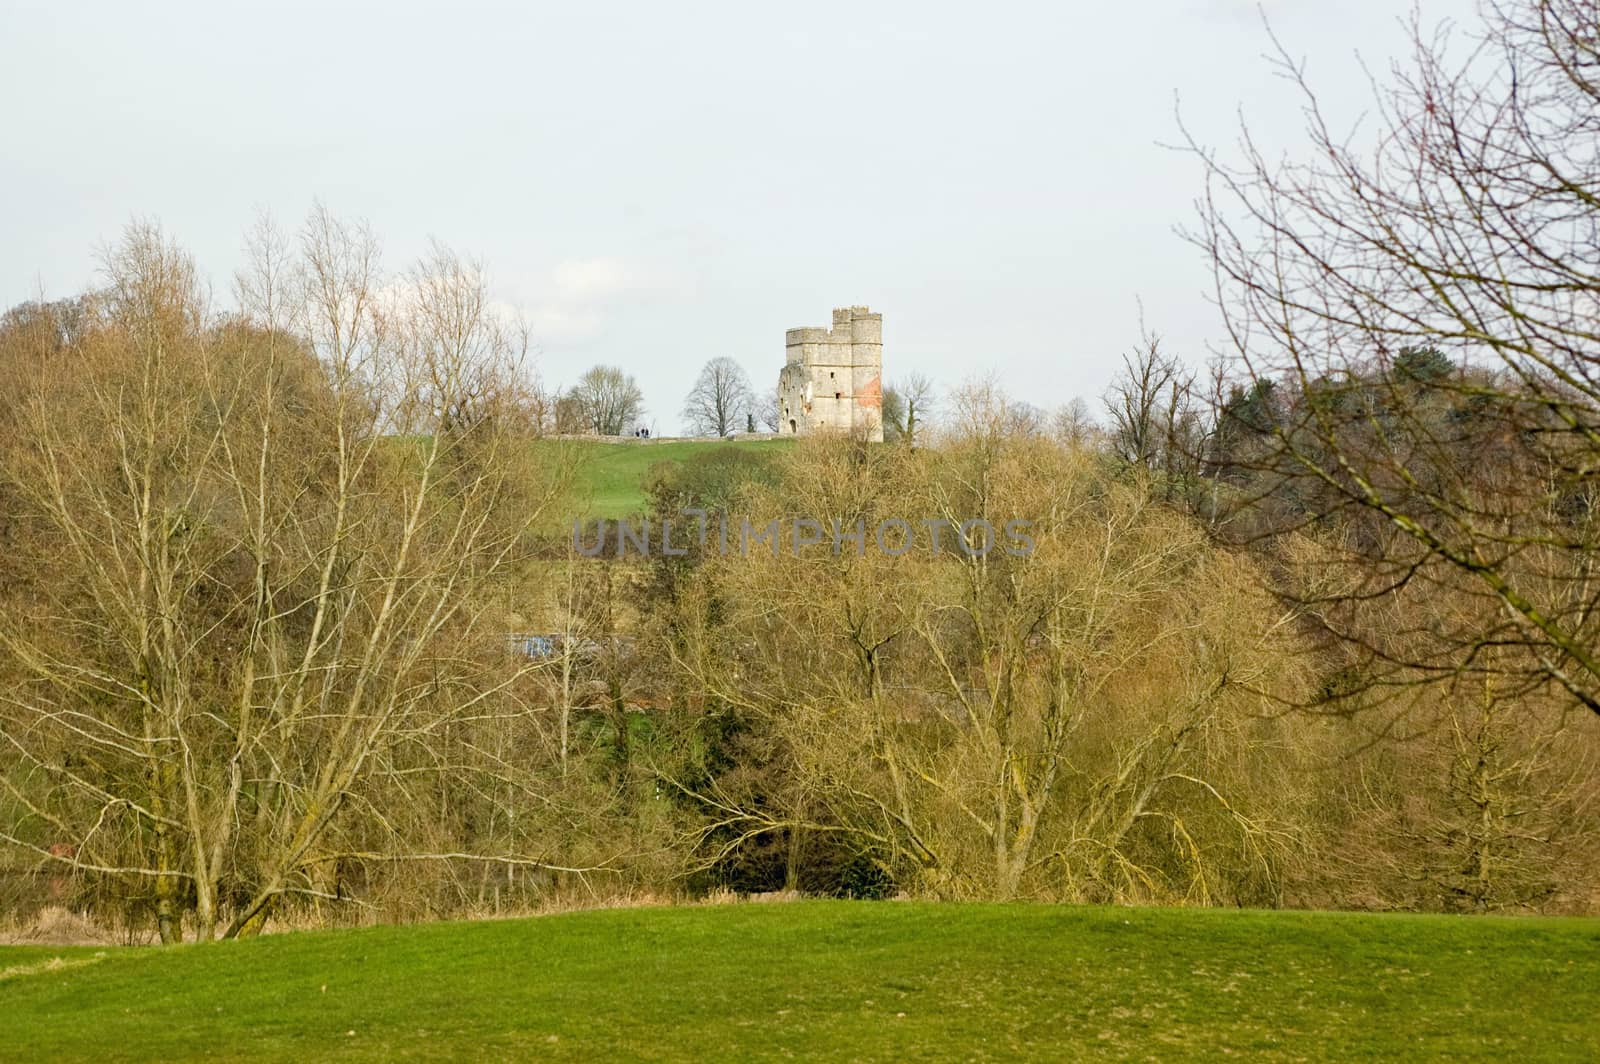 View of the ruins of the medieval Donnington Castle, Newbury, Berkshire.